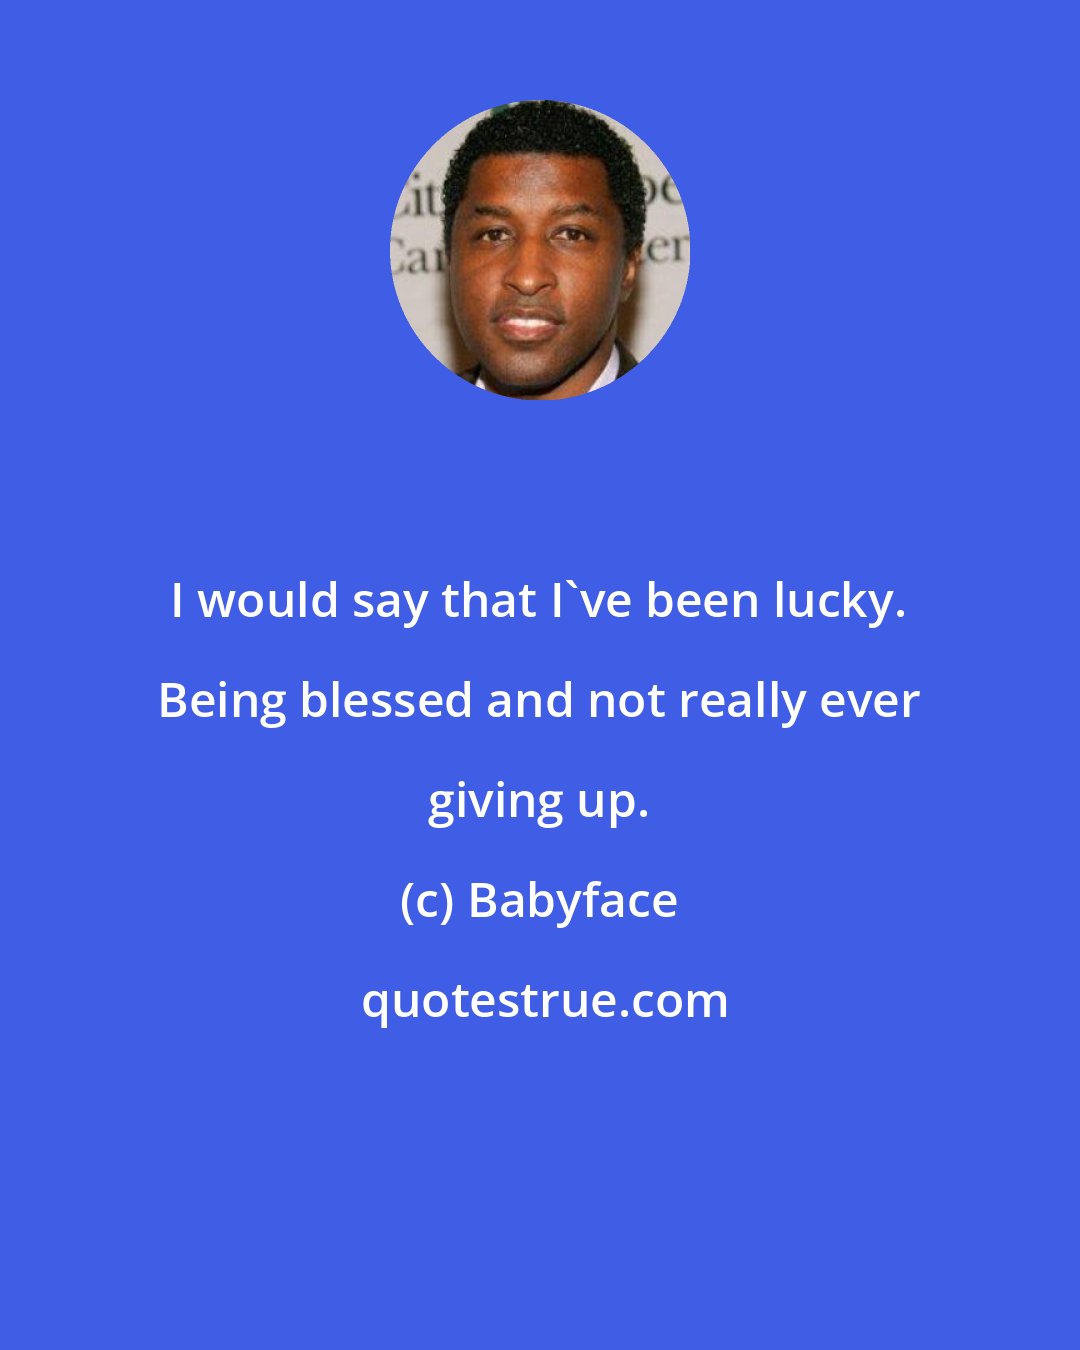 Babyface: I would say that I've been lucky. Being blessed and not really ever giving up.